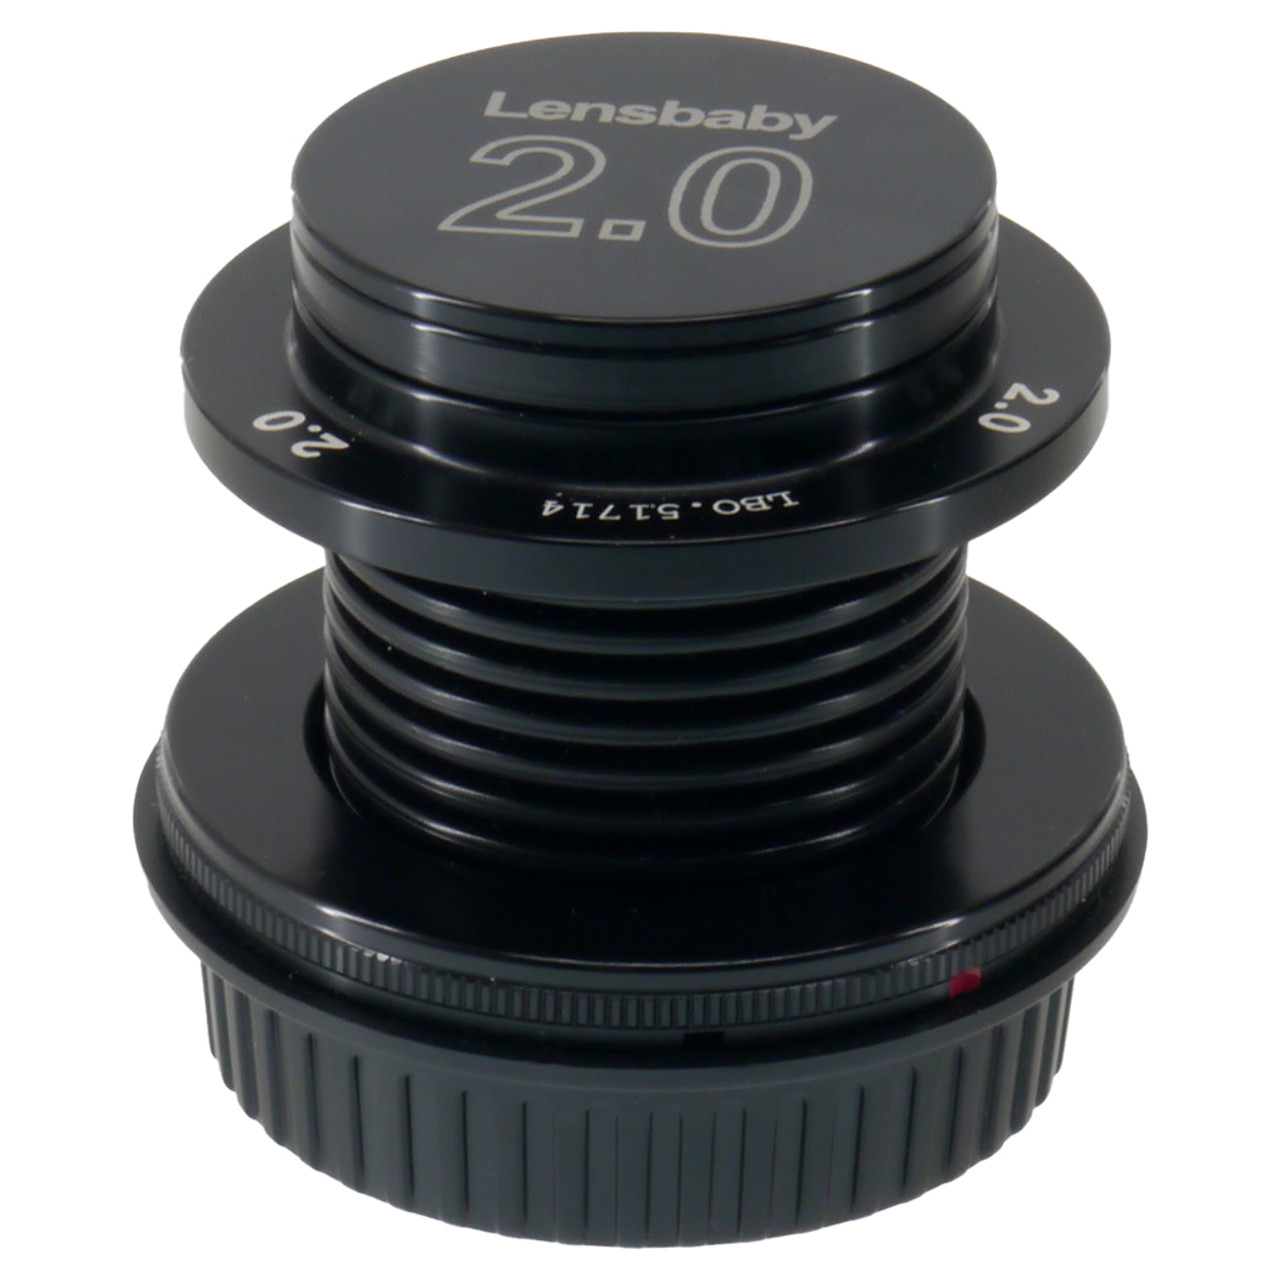 USED LENSBABY 2.0